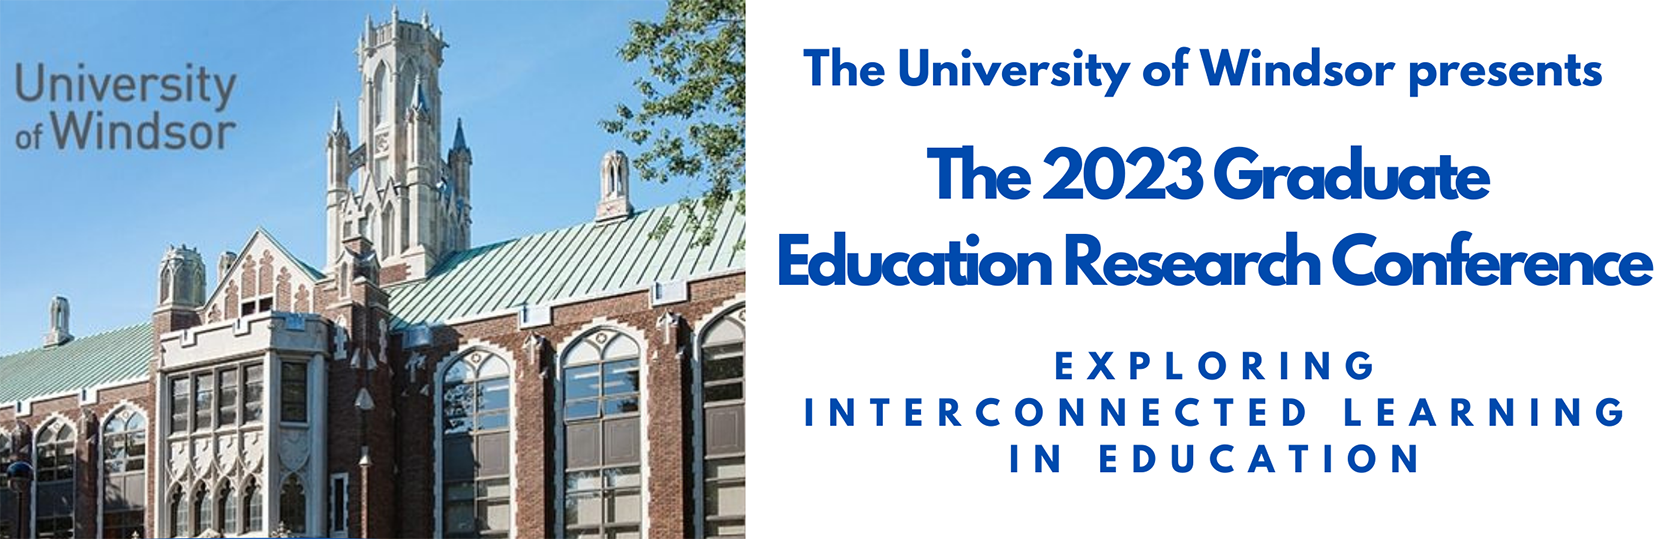 The University of Windsor presents The 2023 Graduate Education Research Conference - Exploring Interconnected learning in Education